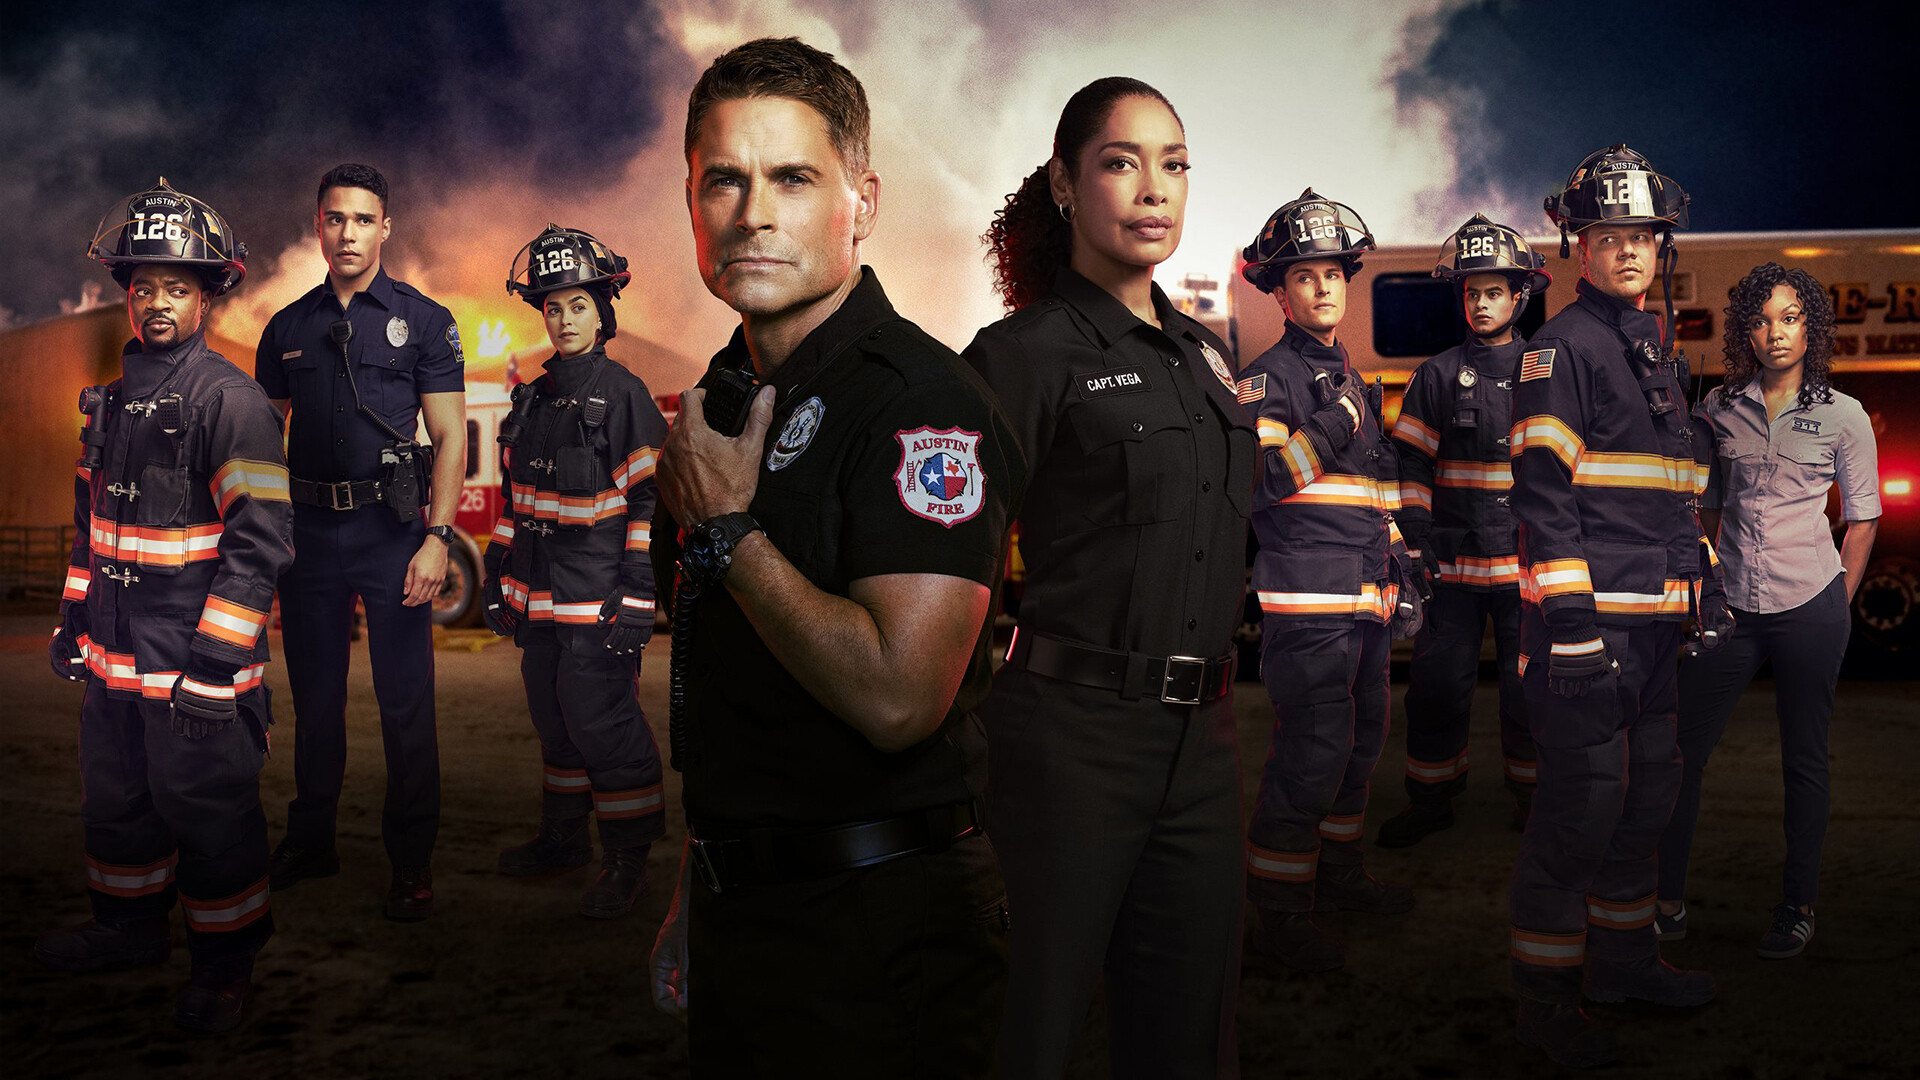 9-1-1: Lone Star (TV Series): TV Shows Main Cast, Leading Characters, Crew Of Firefighters, Policemen. 1920x1080 Full HD Background.